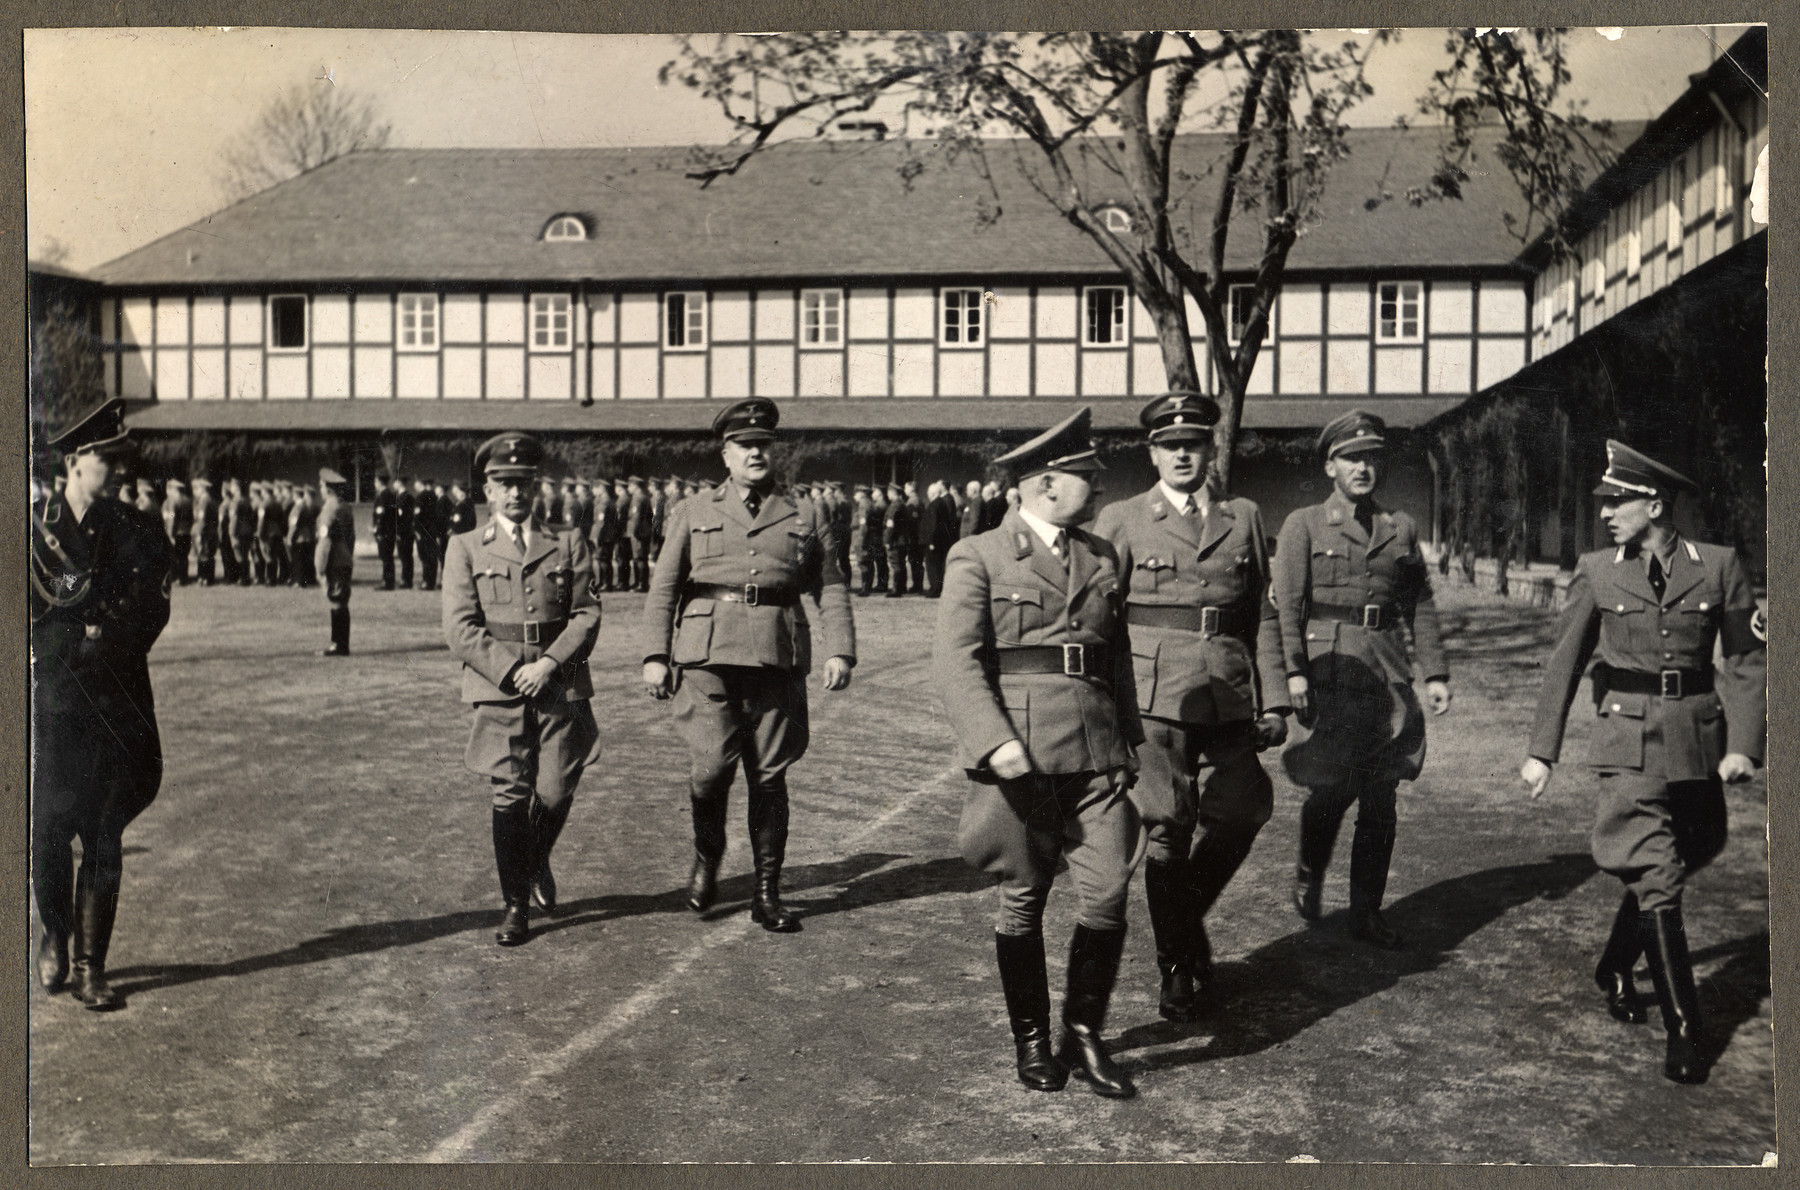 Nazi officials walk in a courtyard at the seminar for Reich training in Erwitte.